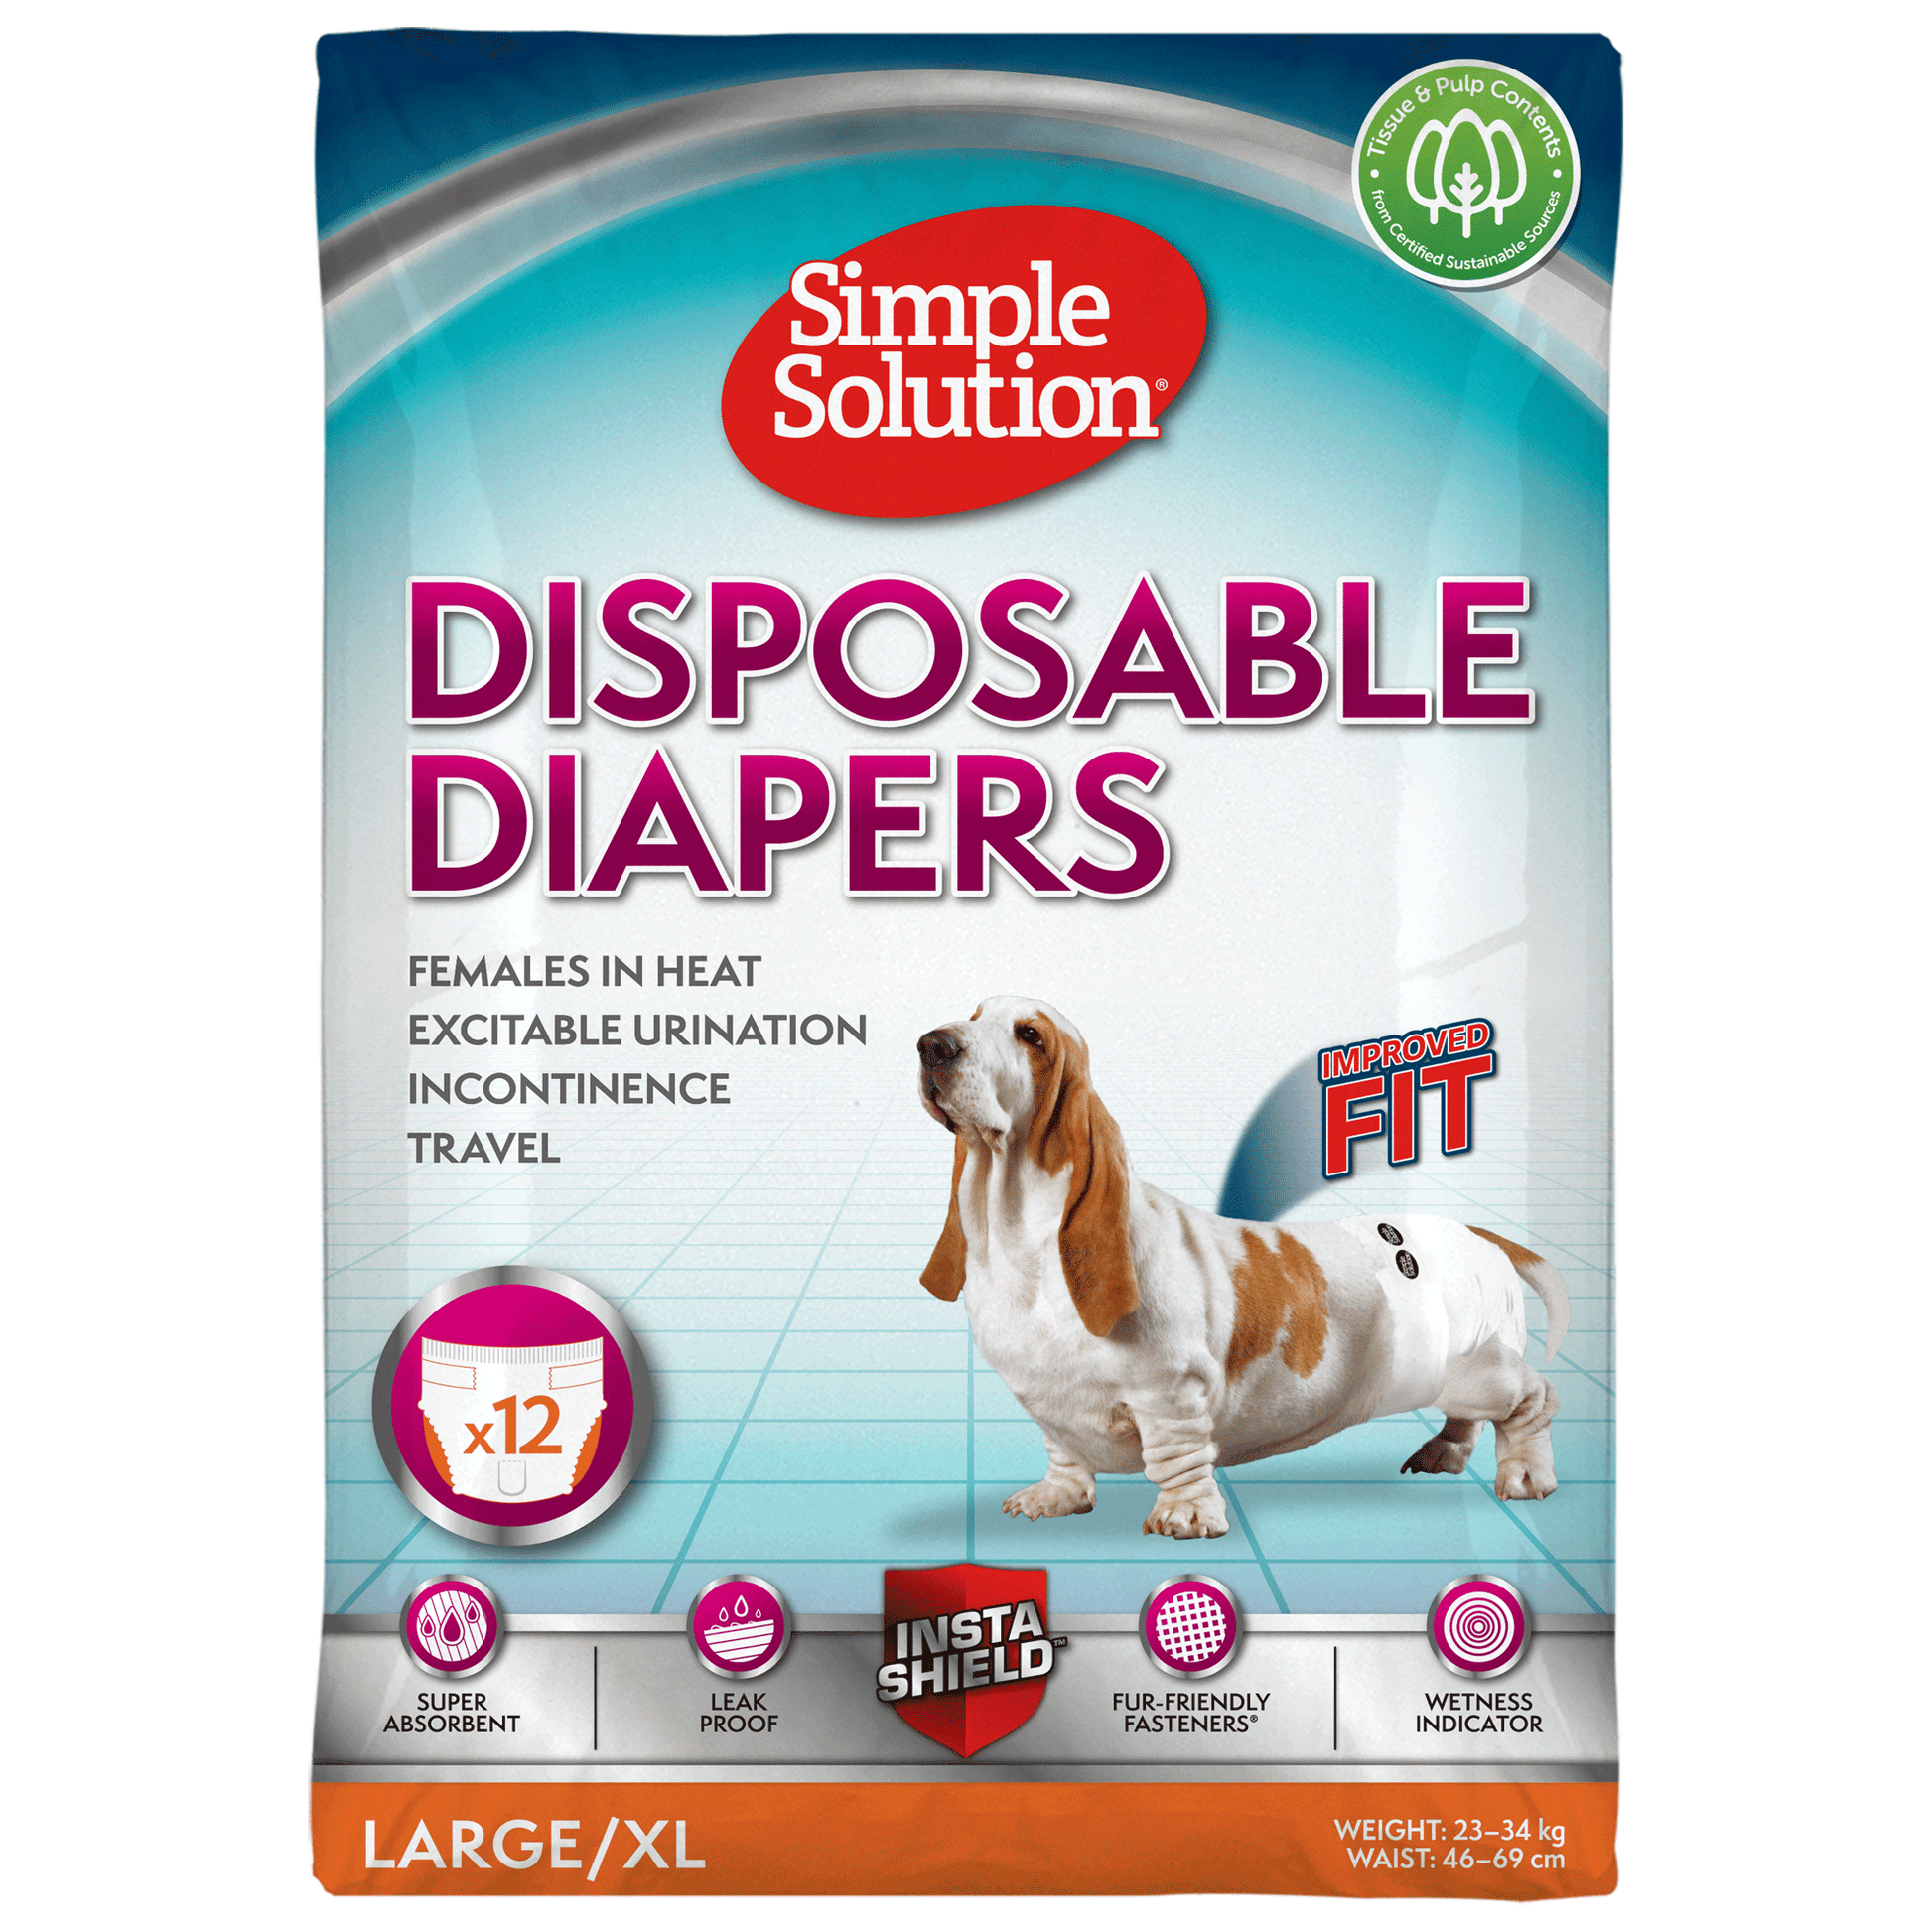 Simple Solution, Disposable Diapers - Petsgool Online